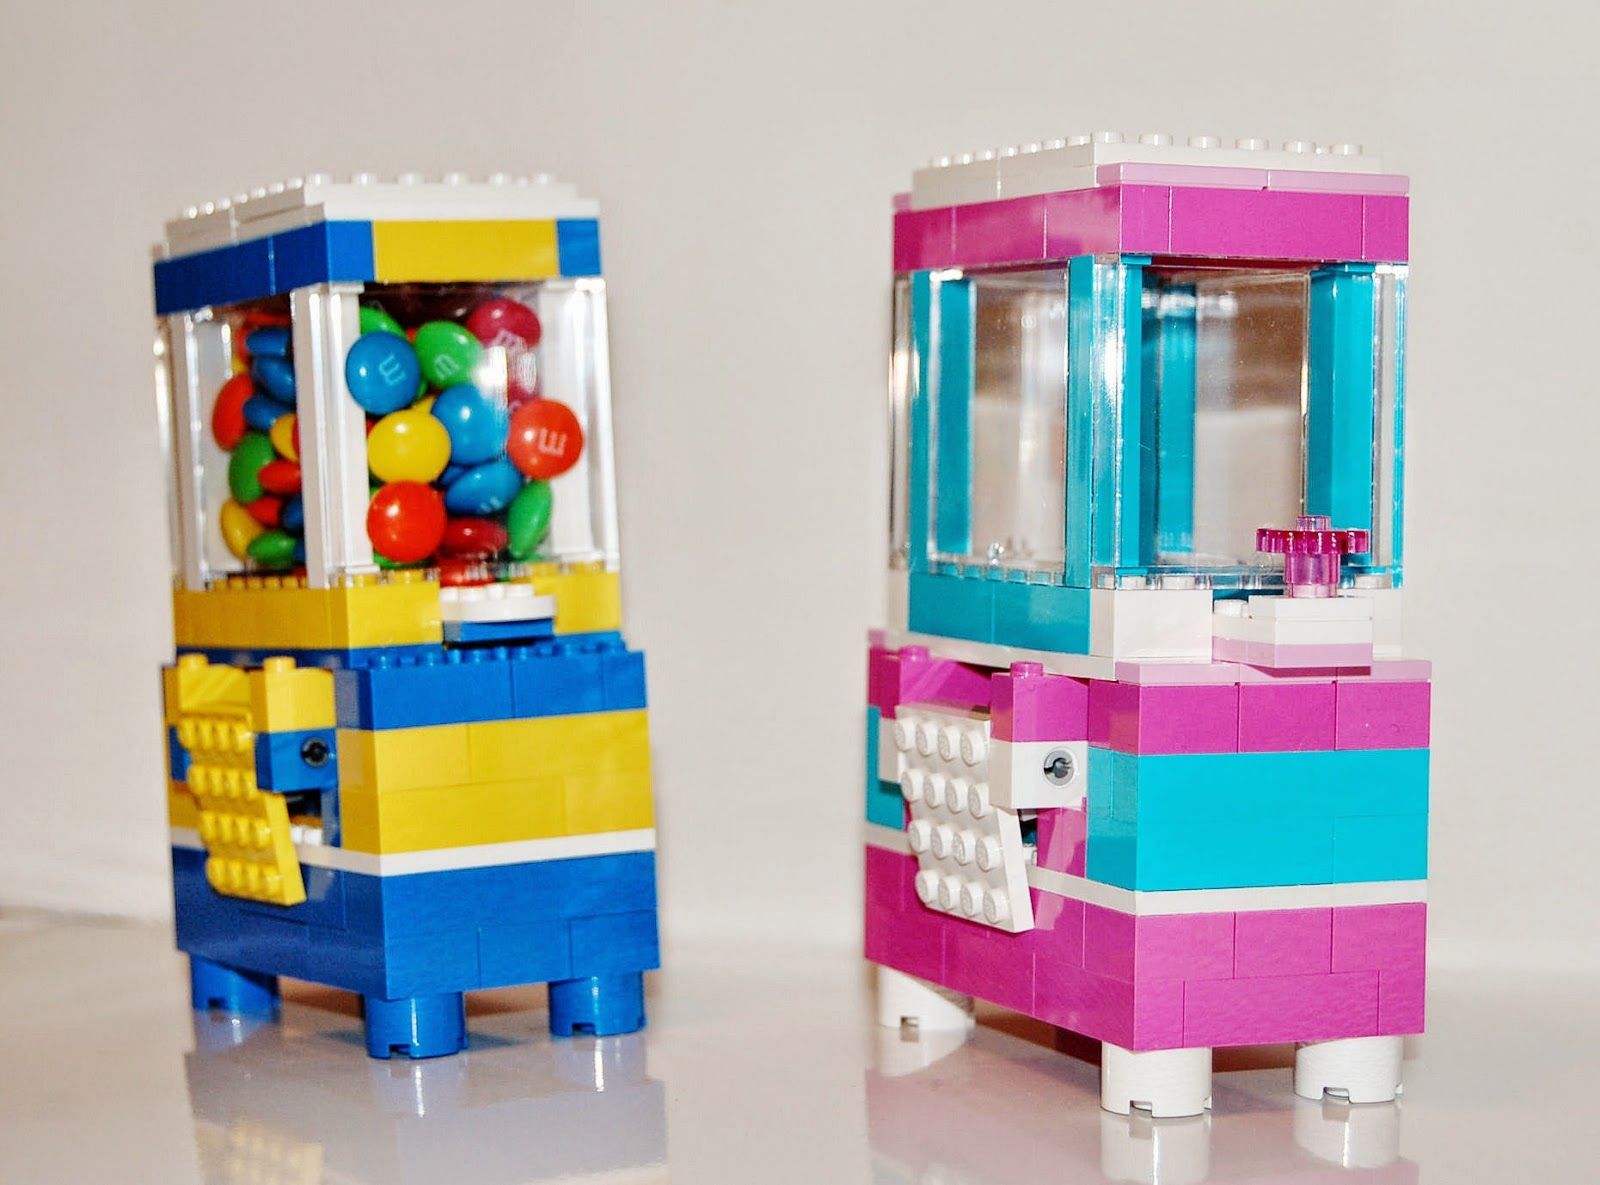 Lego candy dispenser tutorial with link to parts list and step by step